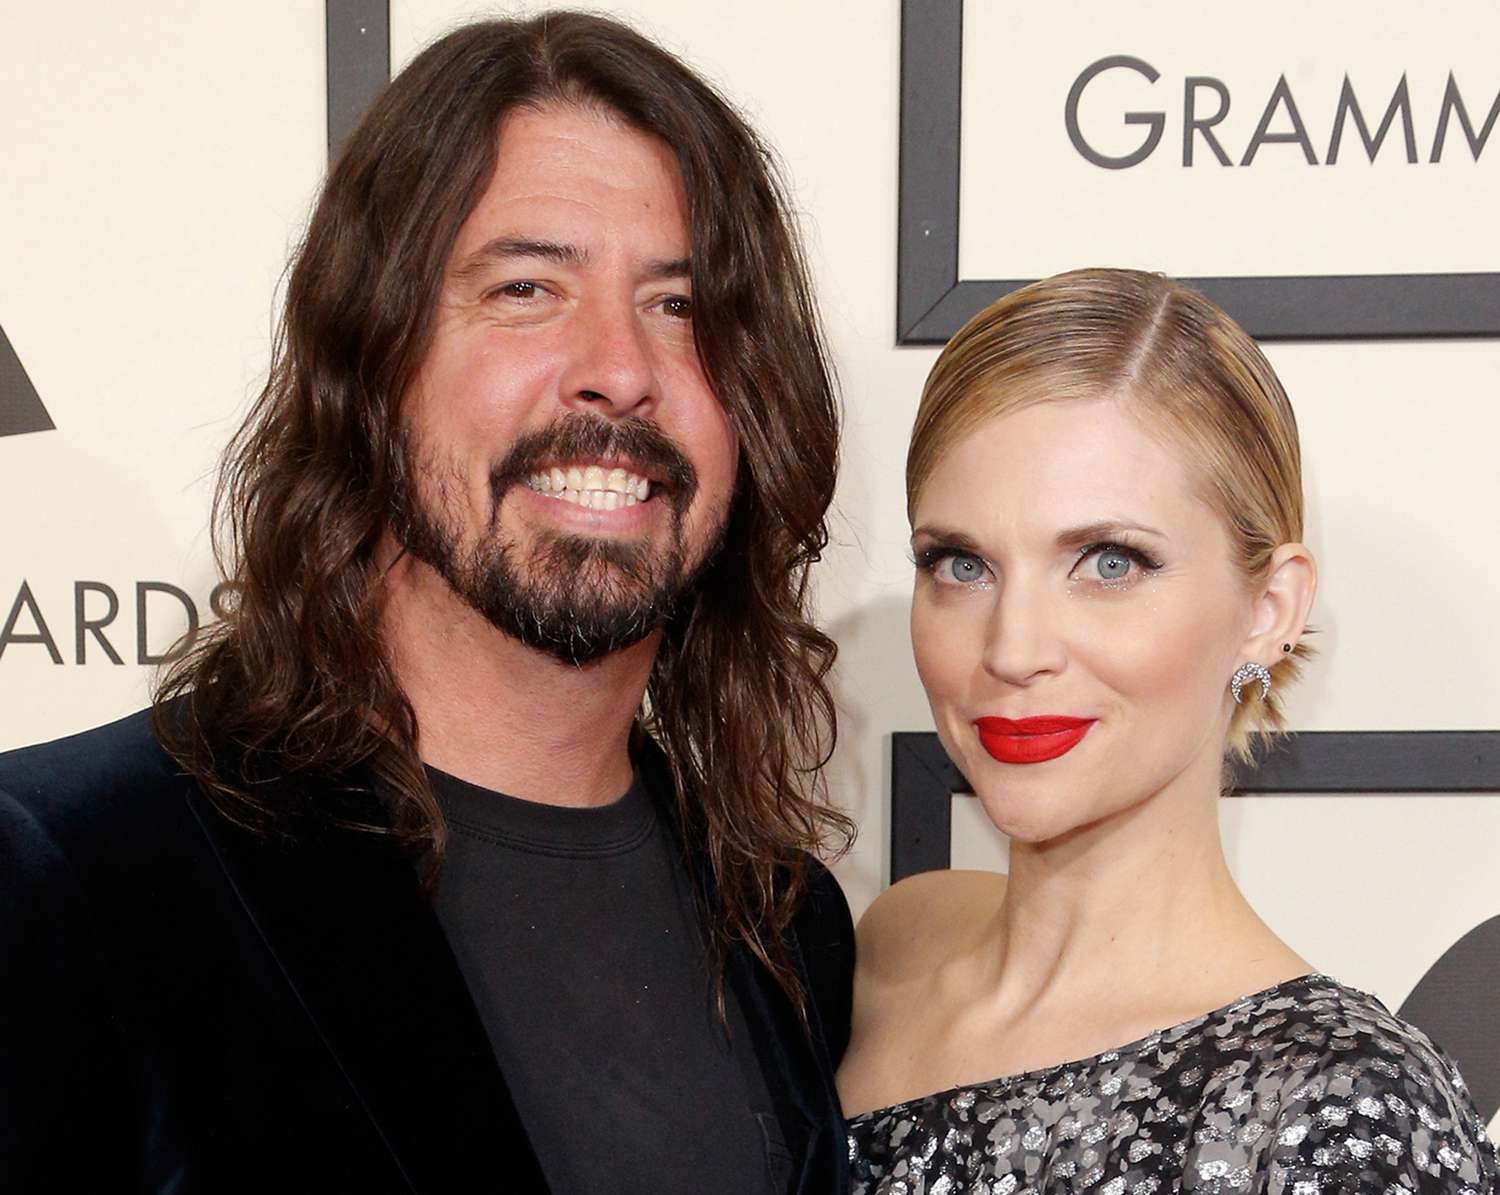 Dave Grohl of Foo Fighters (L) and Jordyn Blum attend The 58th GRAMMY Awards at Staples Center on February 15, 2016 in Los Angeles, California